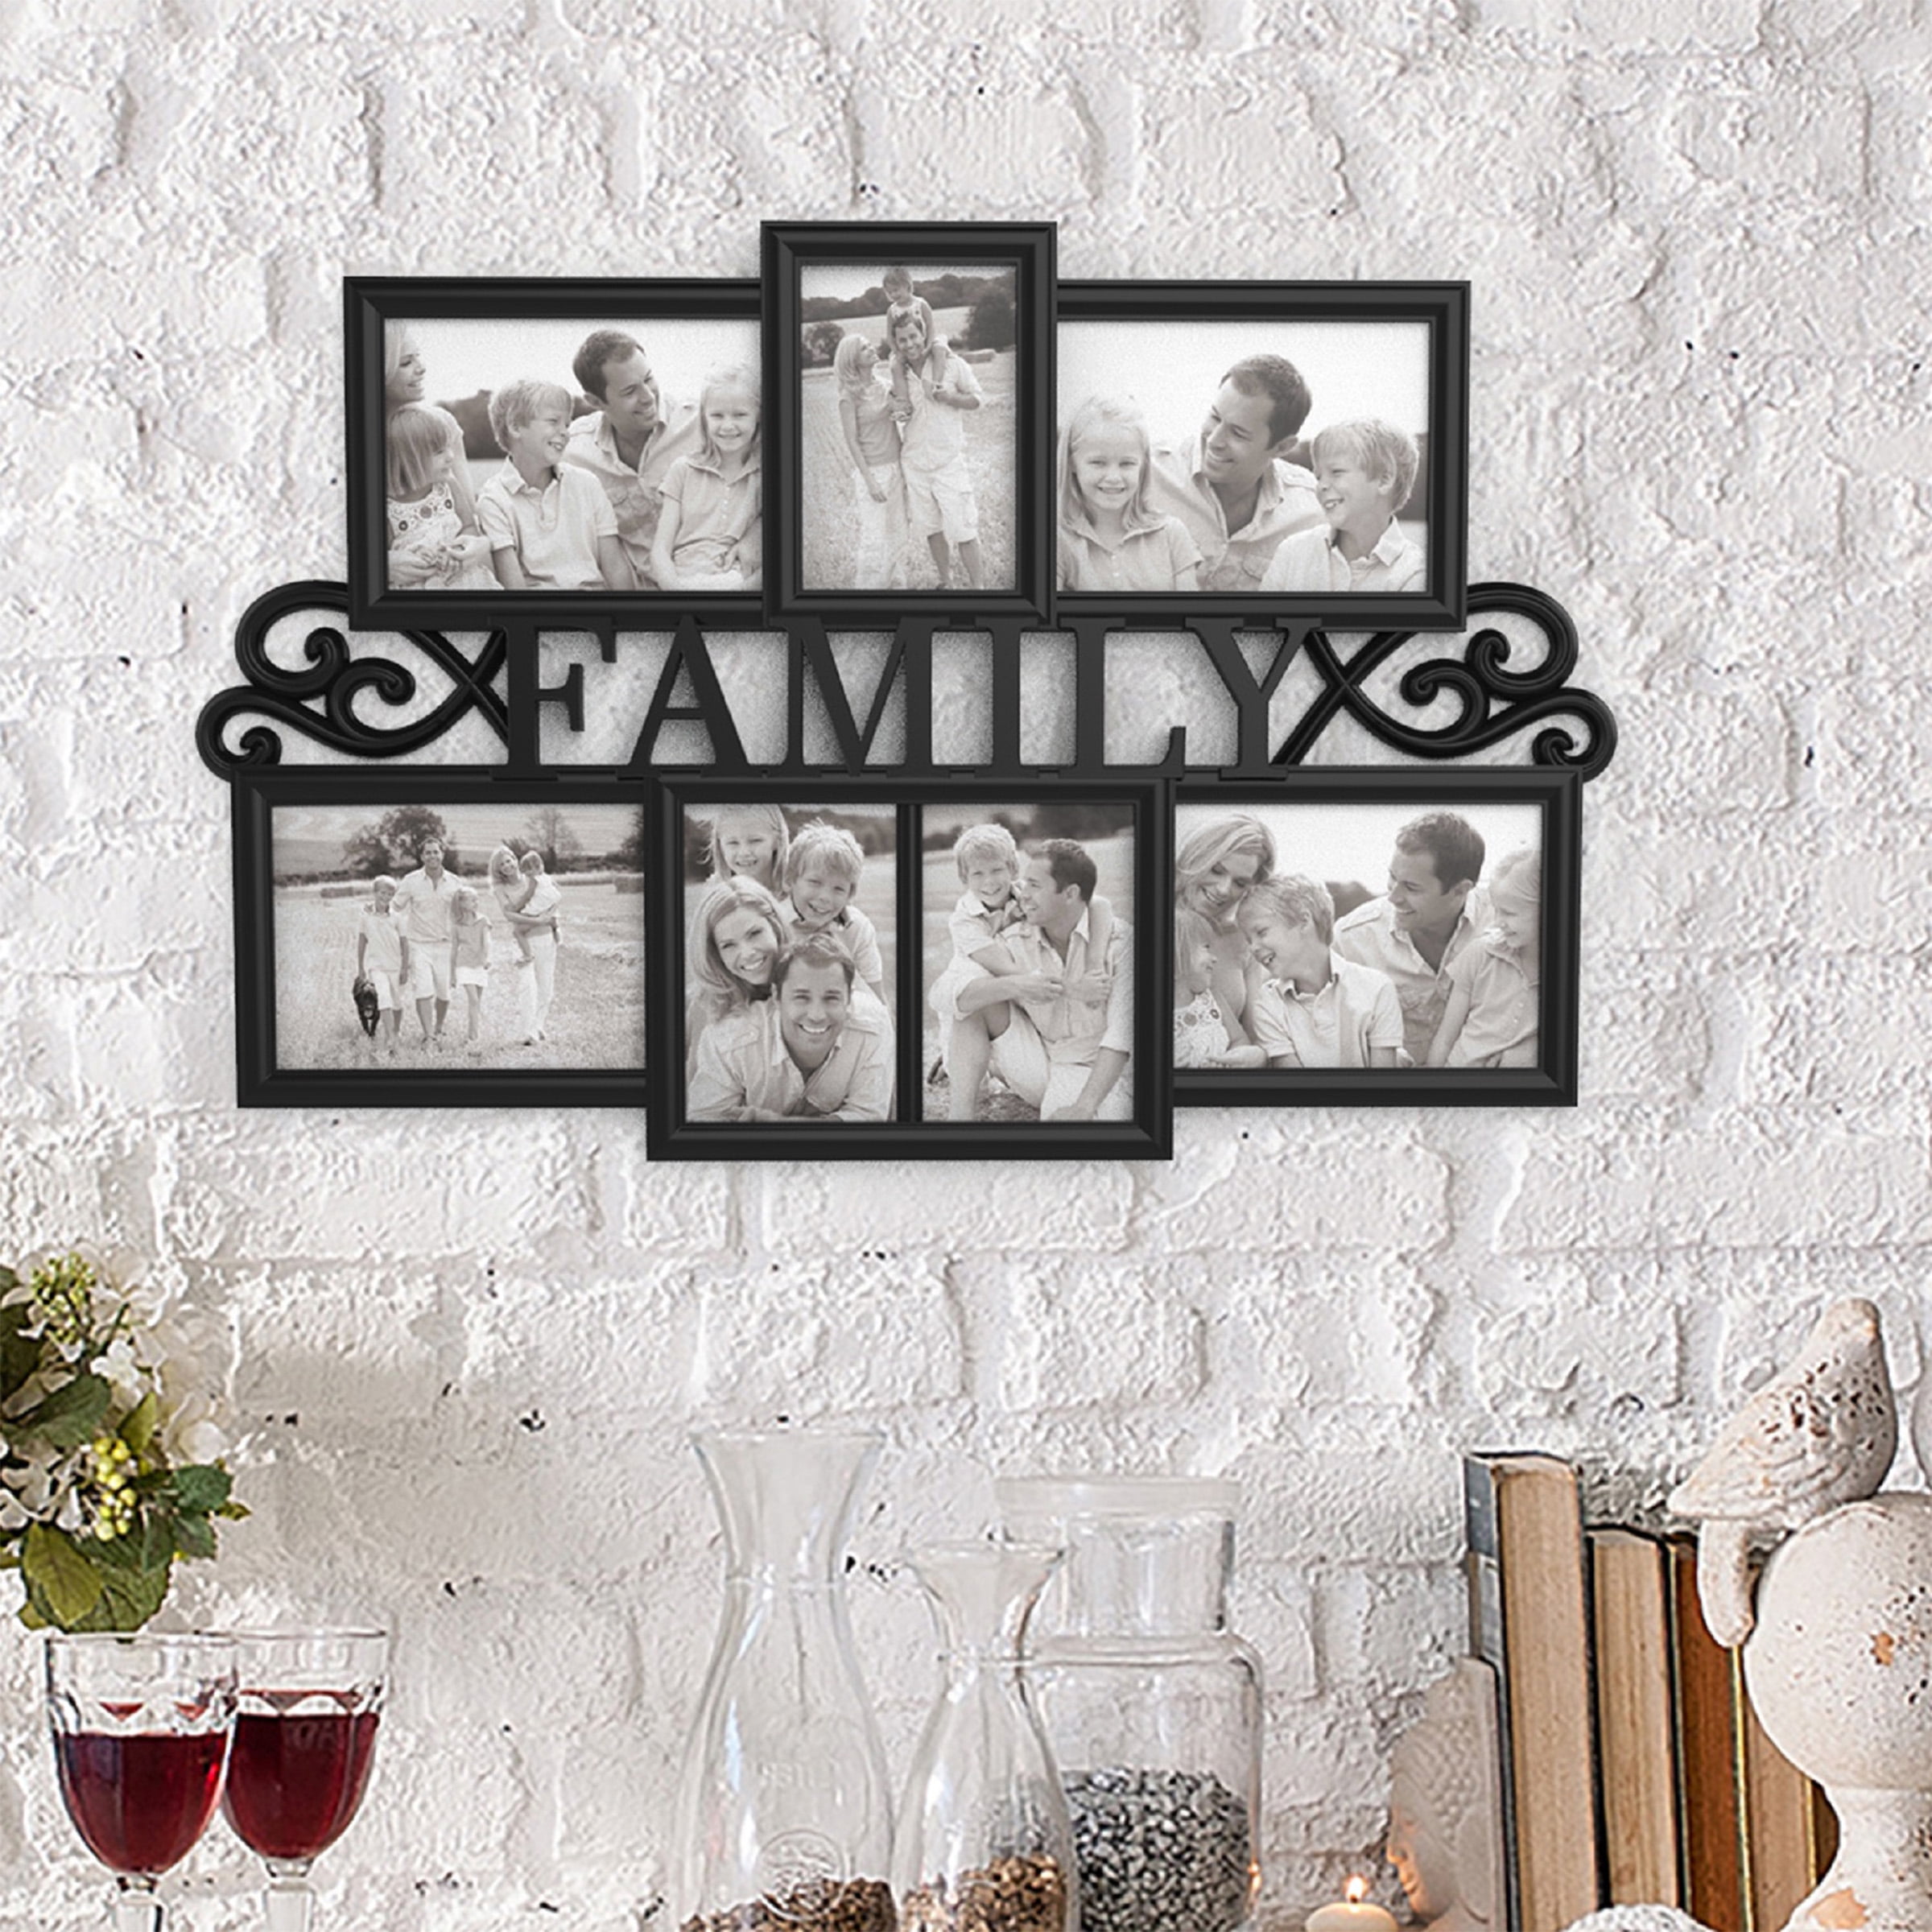 School Years Picture FramePersonalized with Any Name10 Color Options5x7 